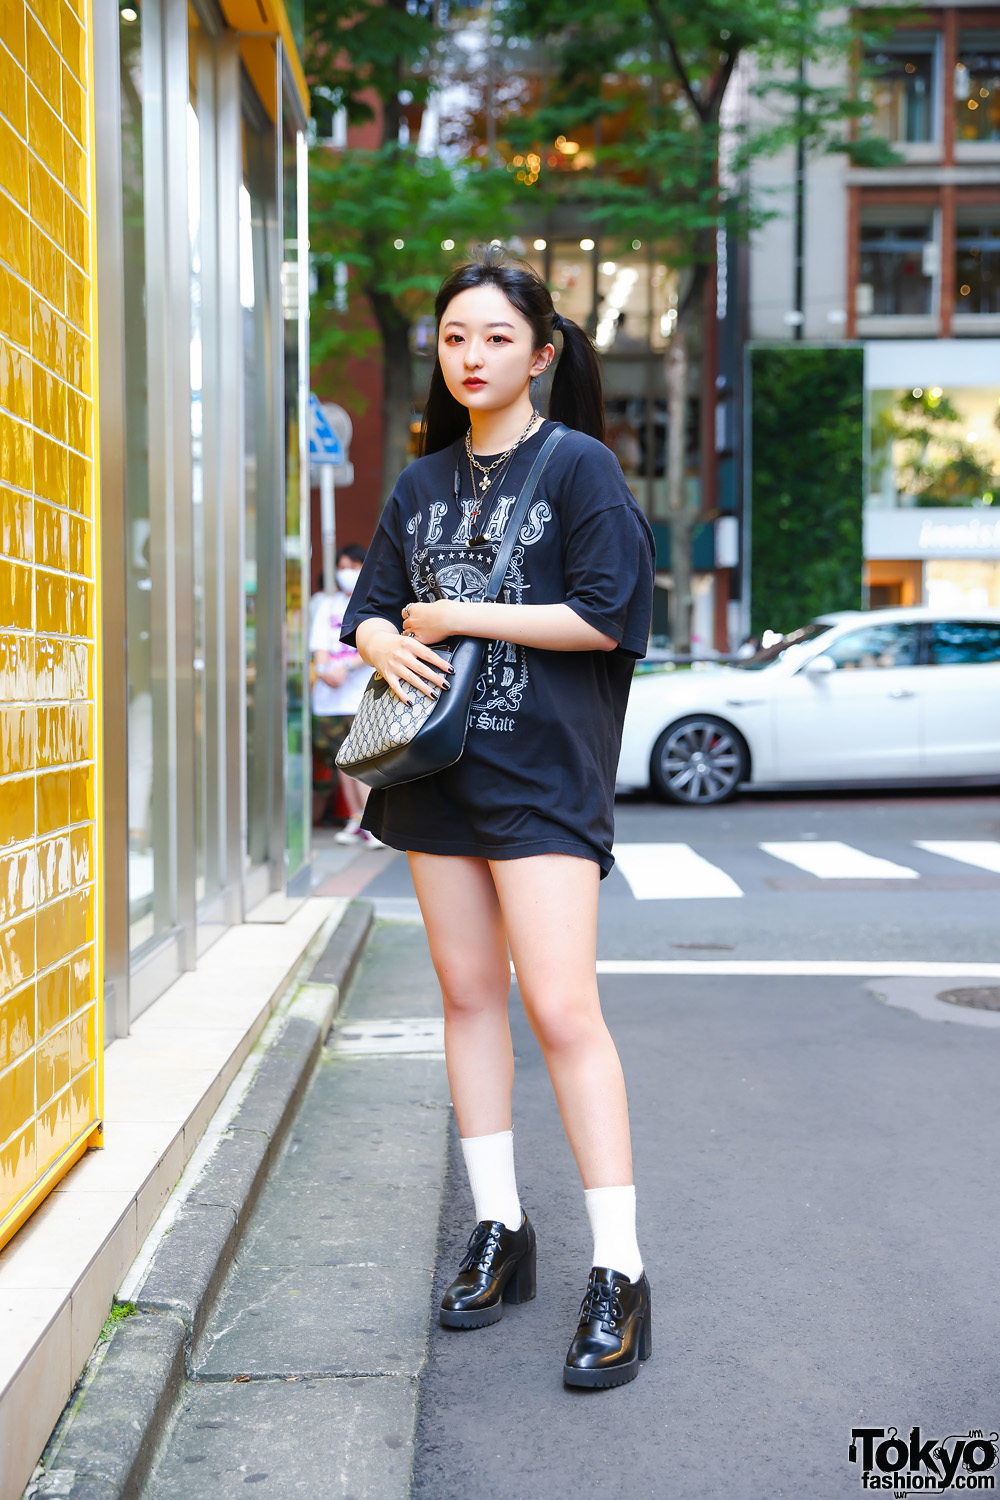 Casual Tokyo Style w/ Twin Tails, Layered Necklaces, Kinji Texas T-Shirt, Gucci Monogram Sling Bag & Zara Heeled Lace-Ups